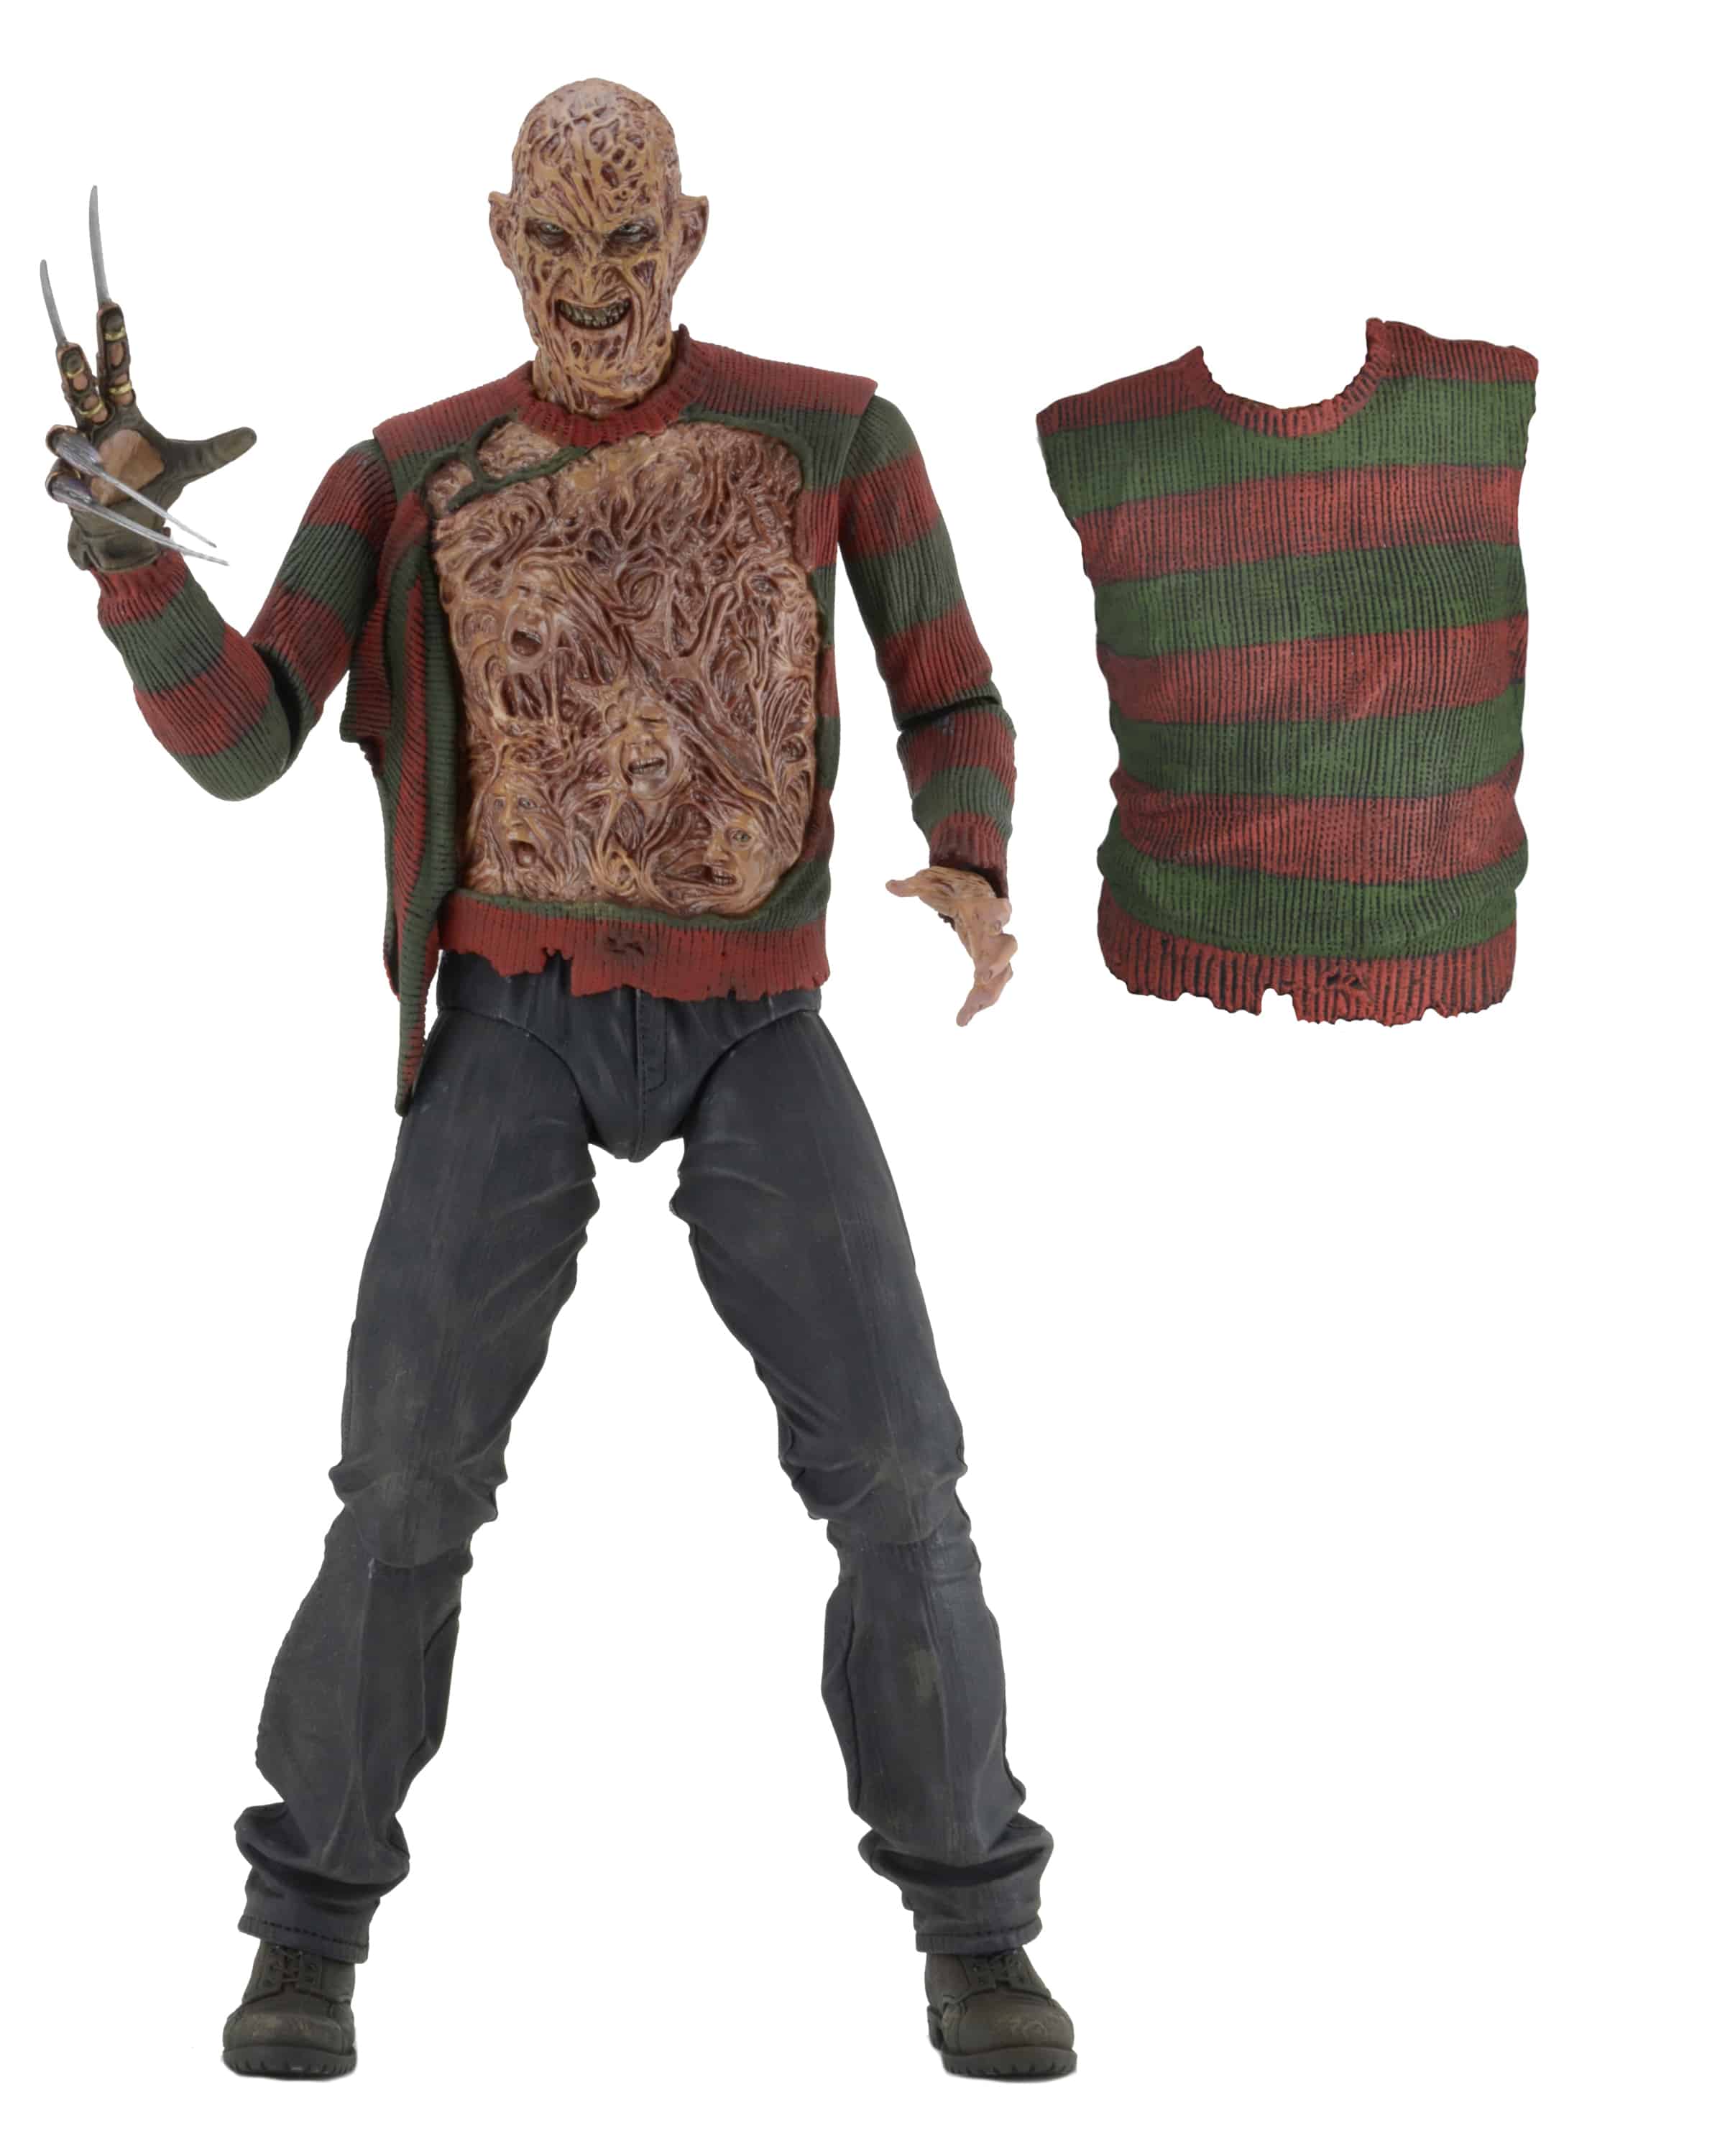 The NECA Vault reopens with limited edition Horror and Batman figures to close out 2022 21